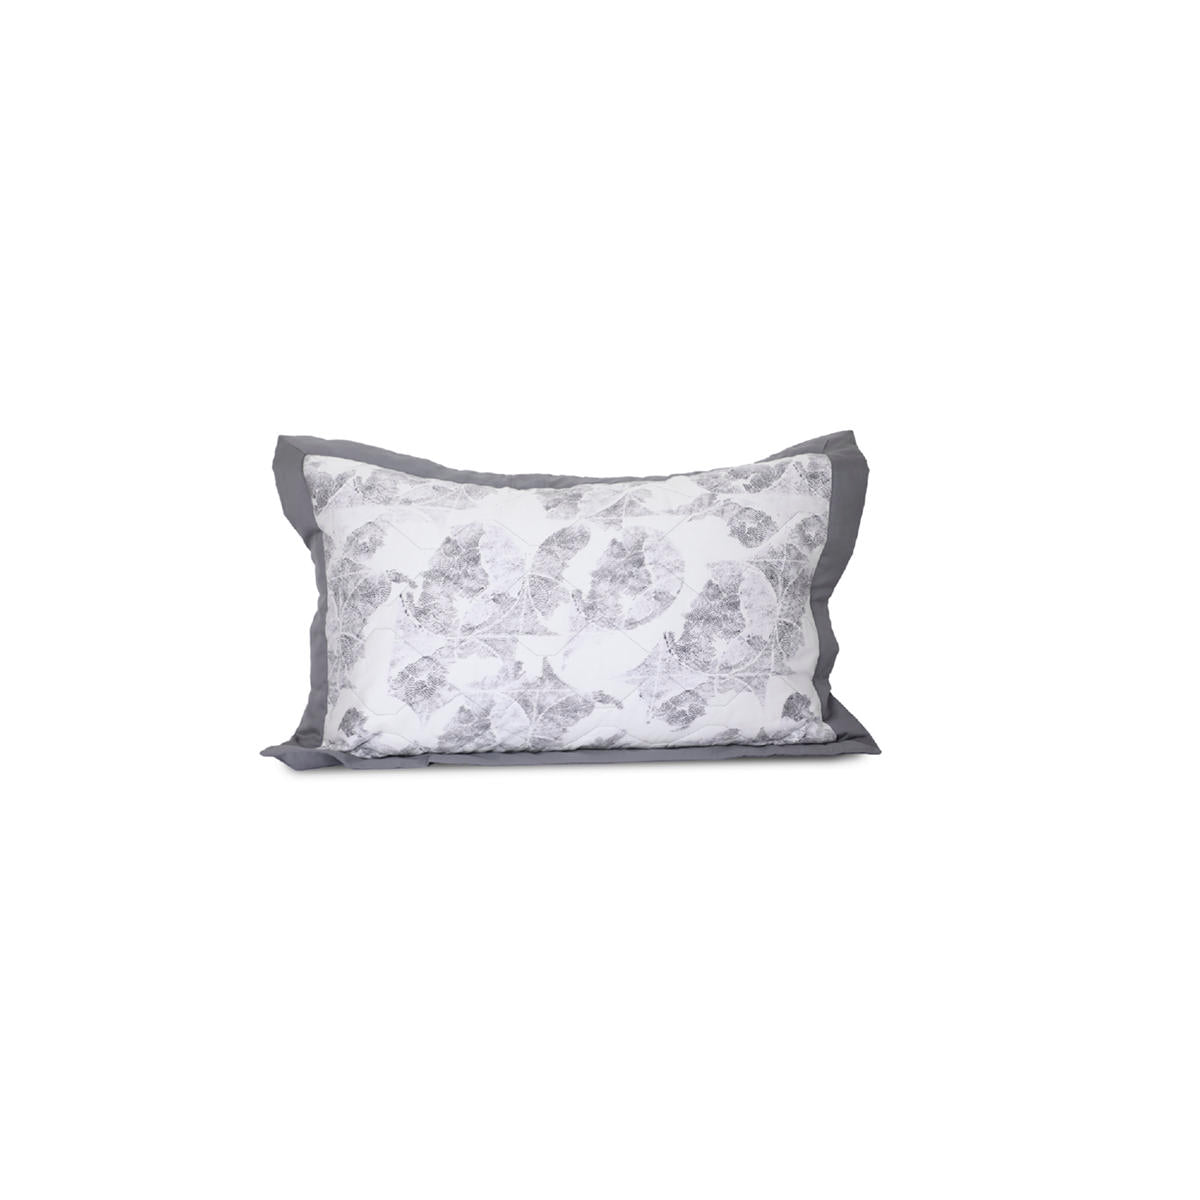 Ringlet Quilted 2PC Pillow Sham Set